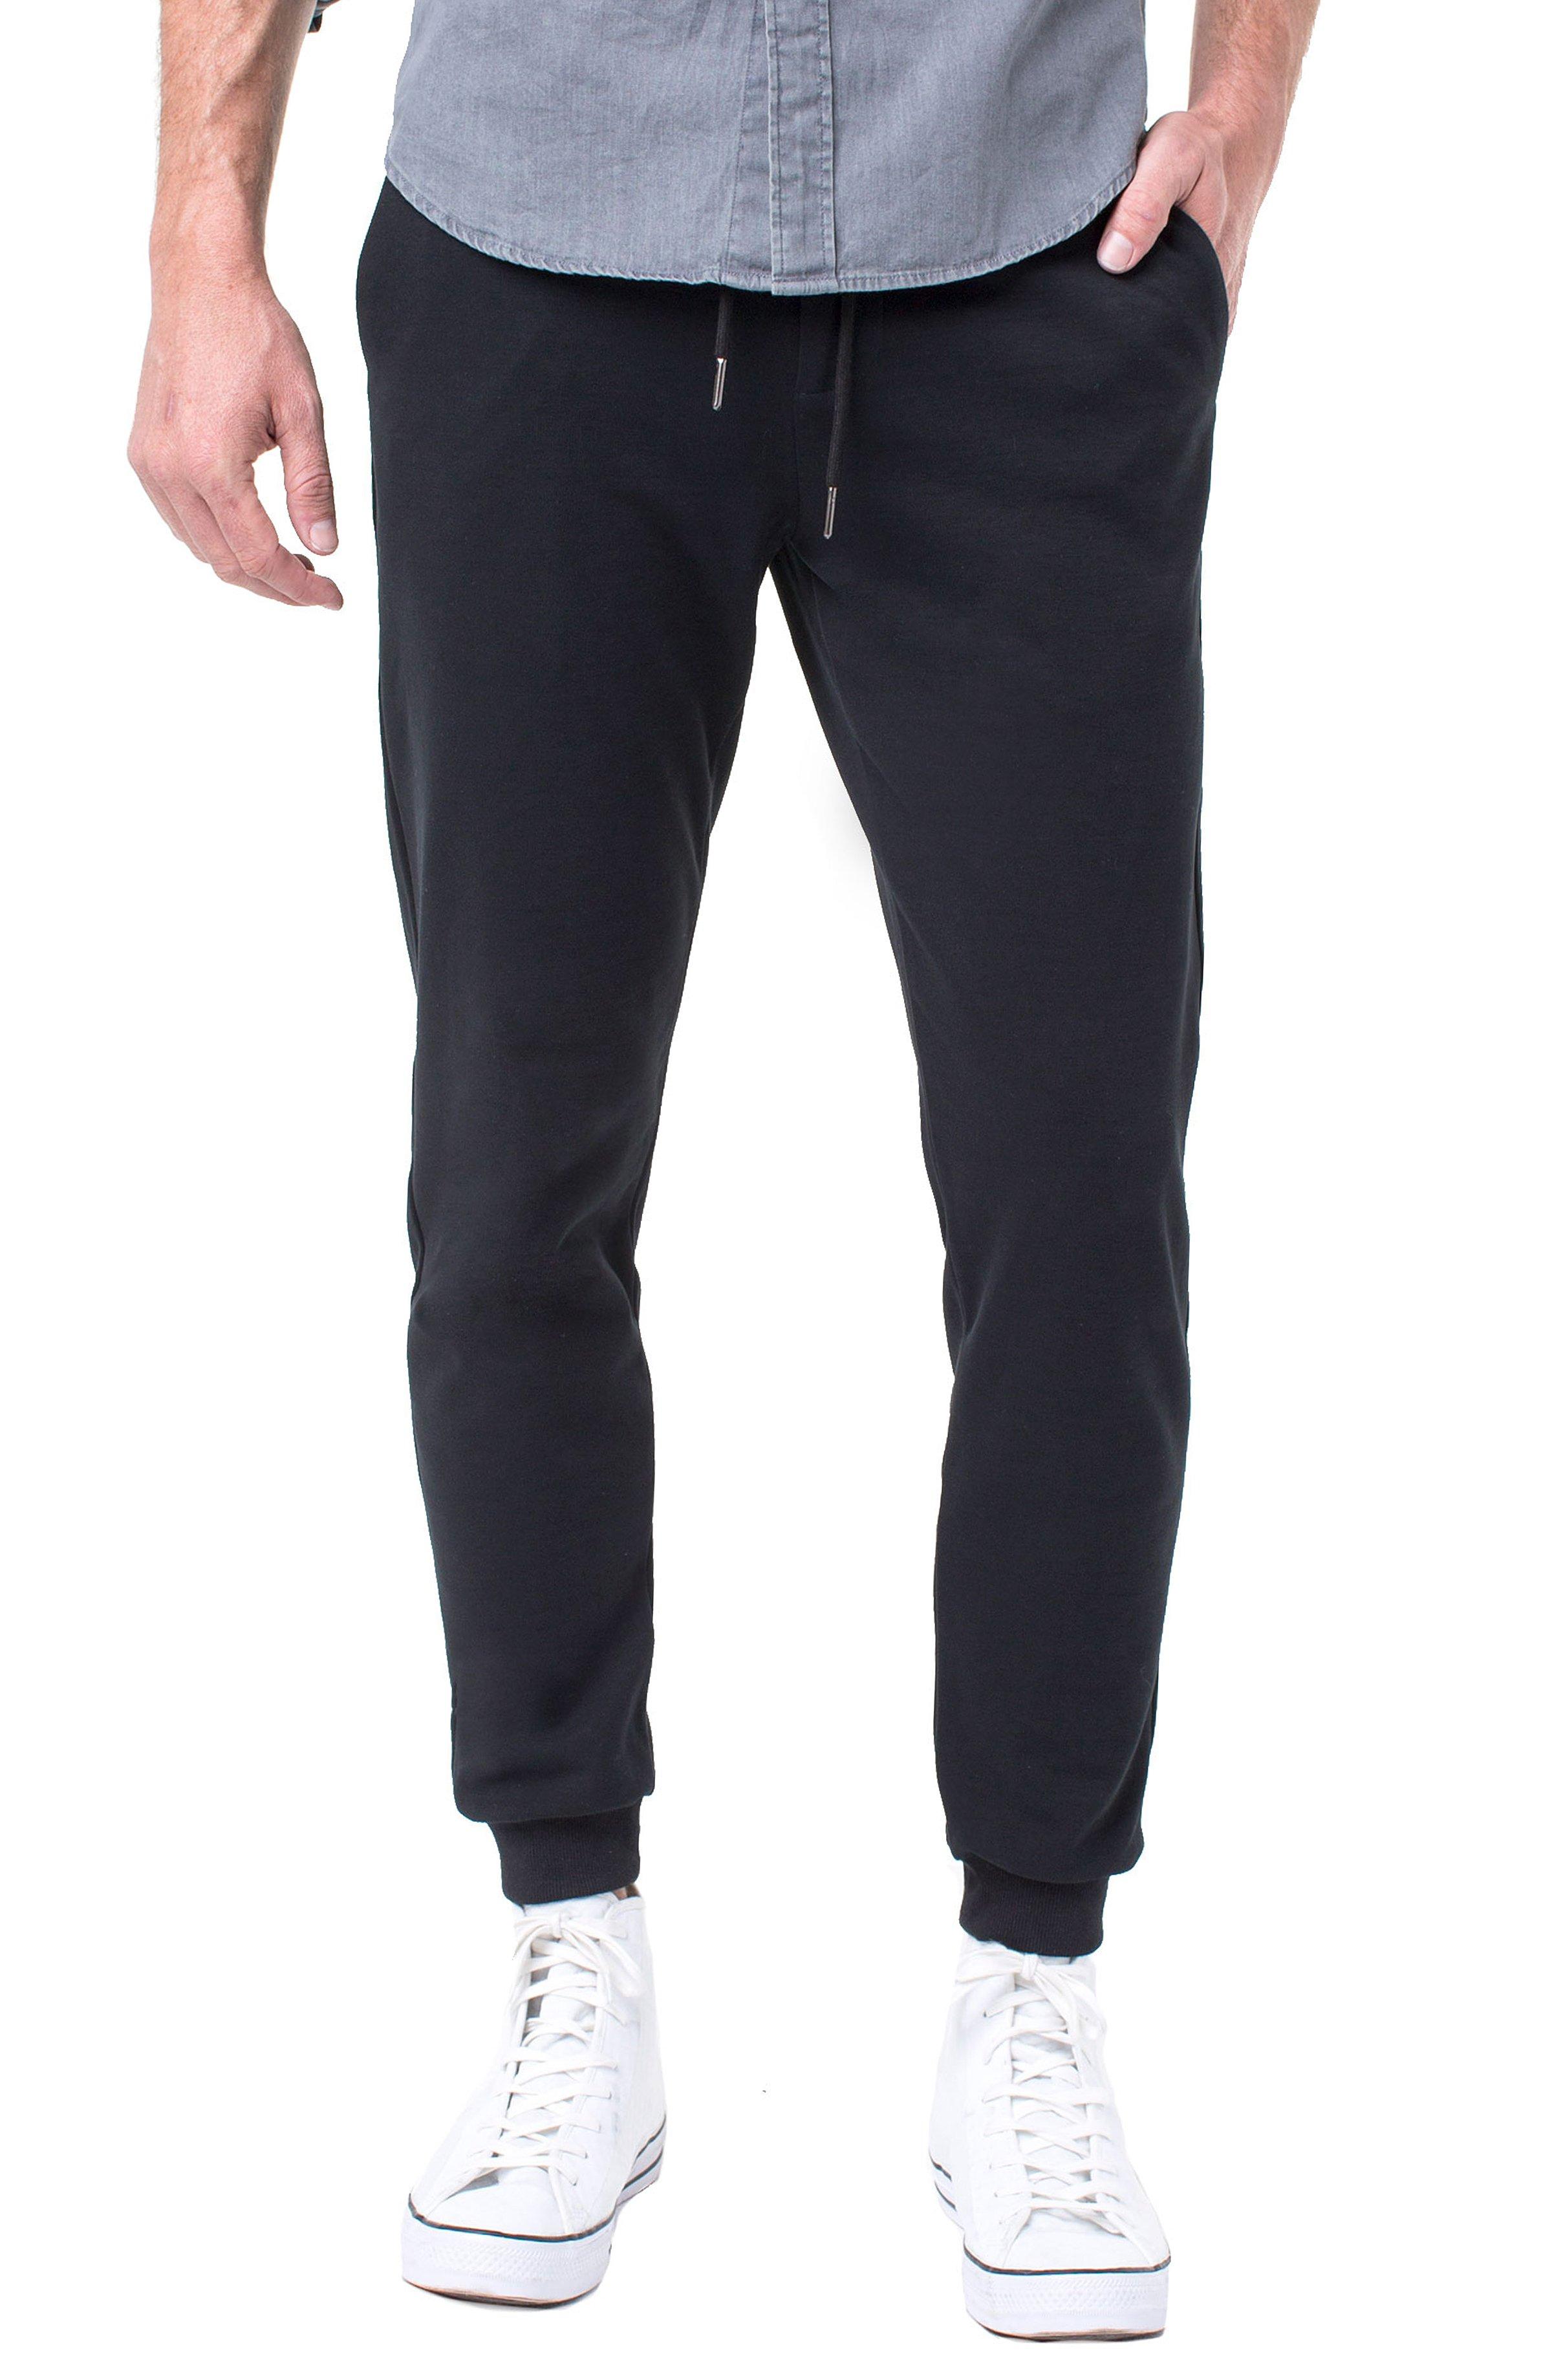 Liverpool Jeans Company Mercer Knit JOGGER in Black for Men - Lyst